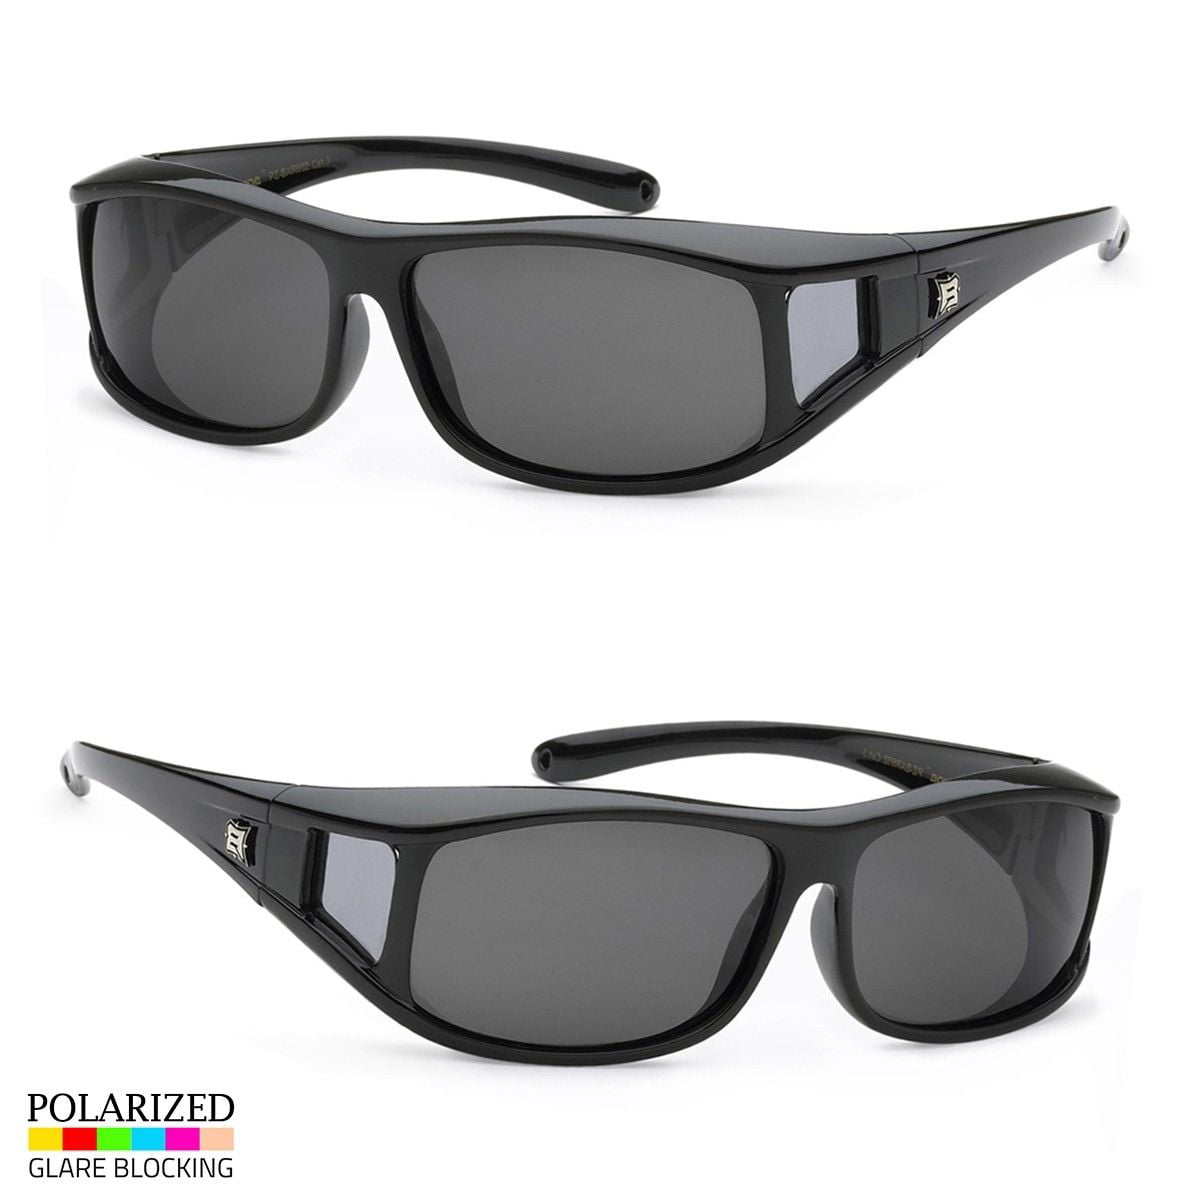 POLARIZED cover put over Sunglasses wear Rx glass fit driving SIZE ...